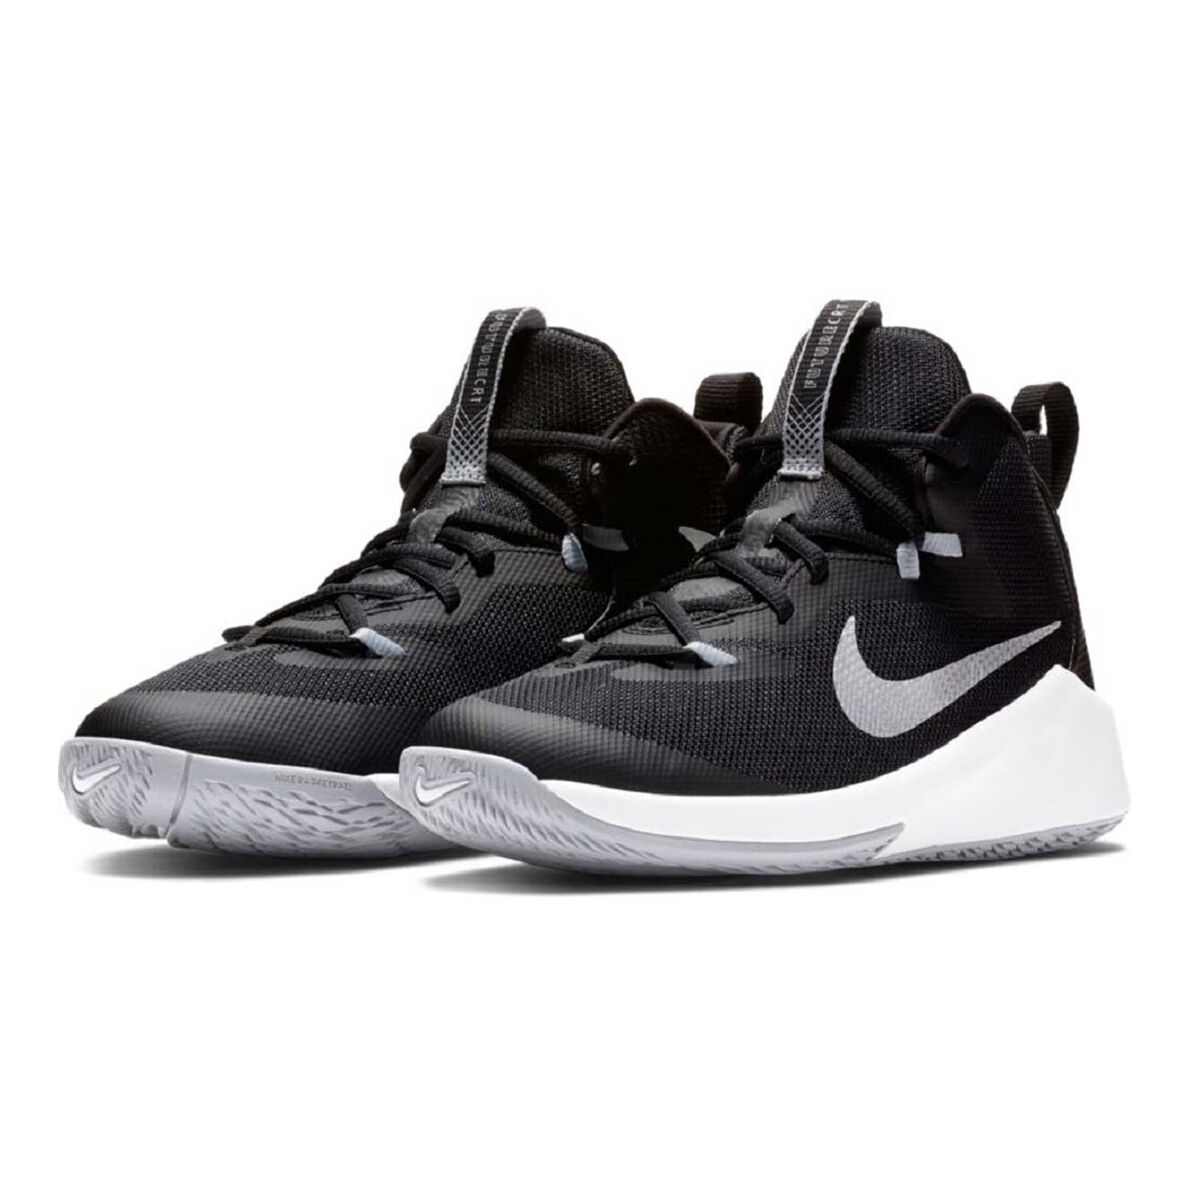 black and white basketball shoes